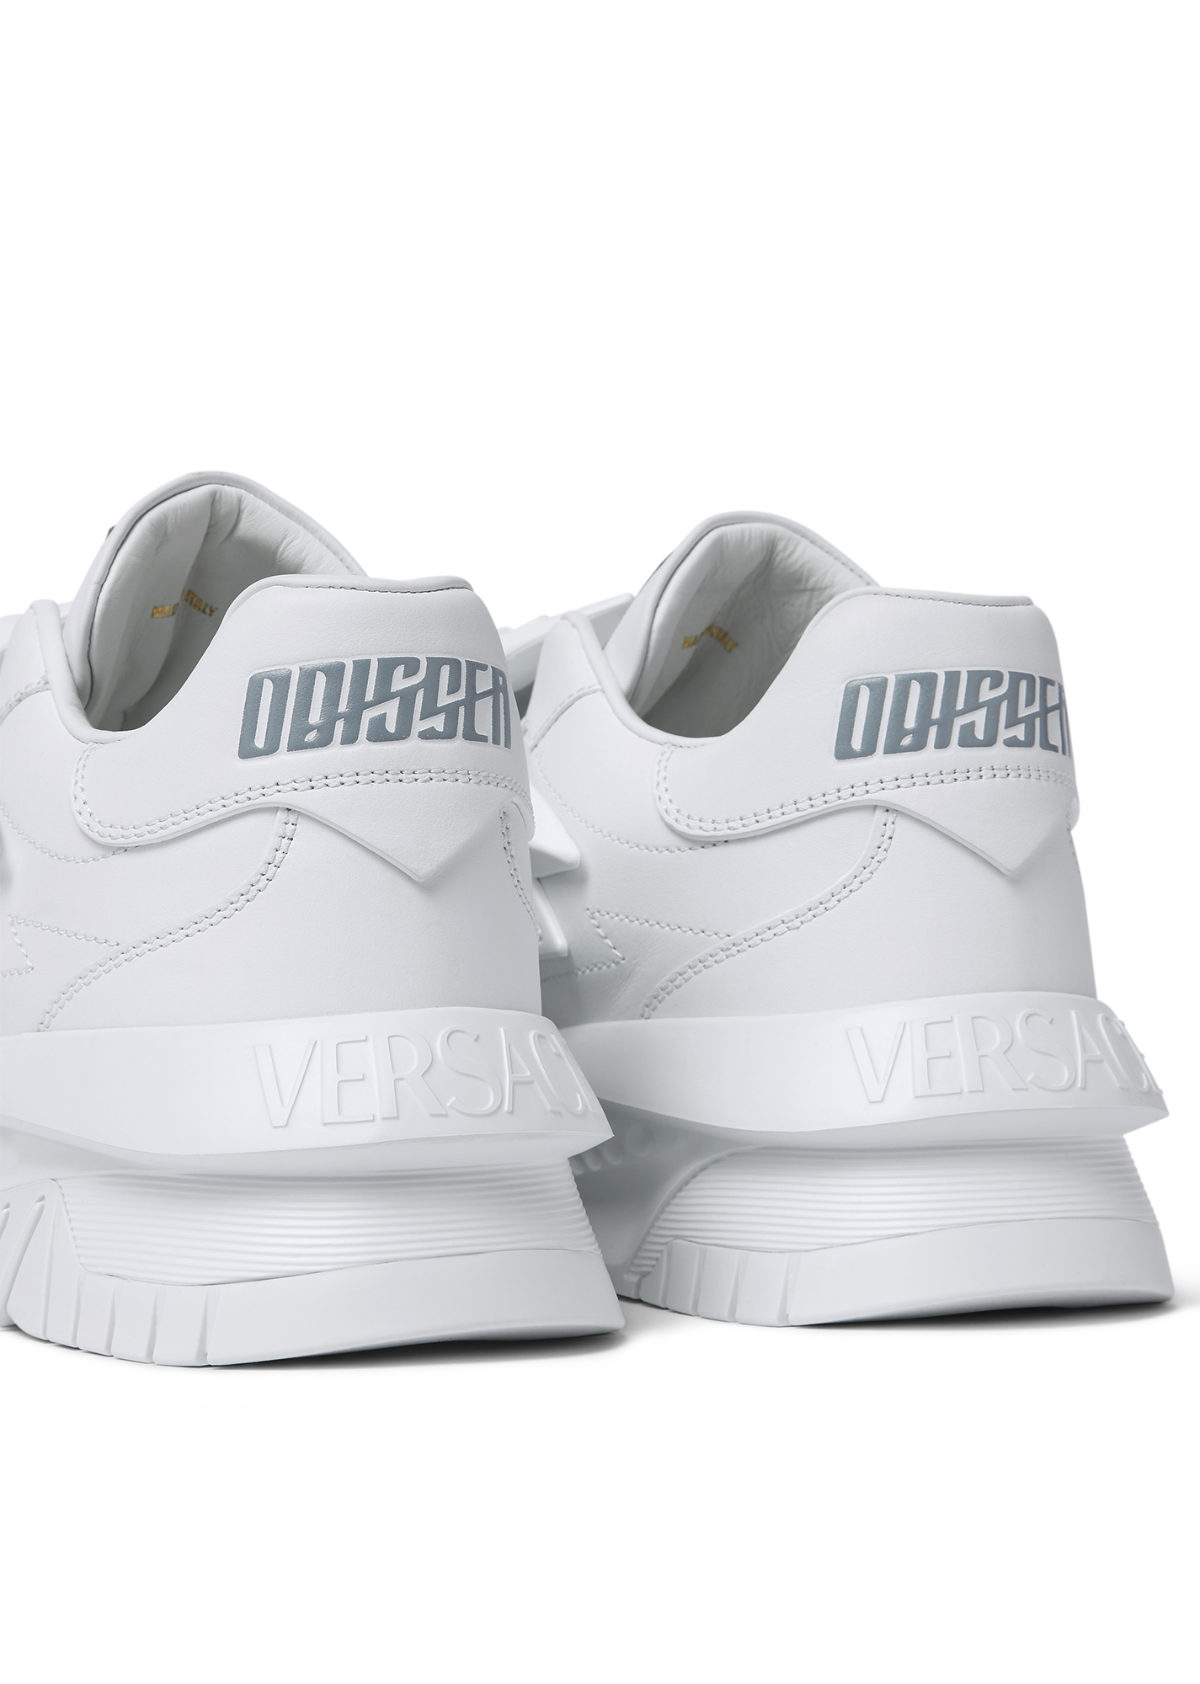 Versace Introduces Its New Odissea Sneaker